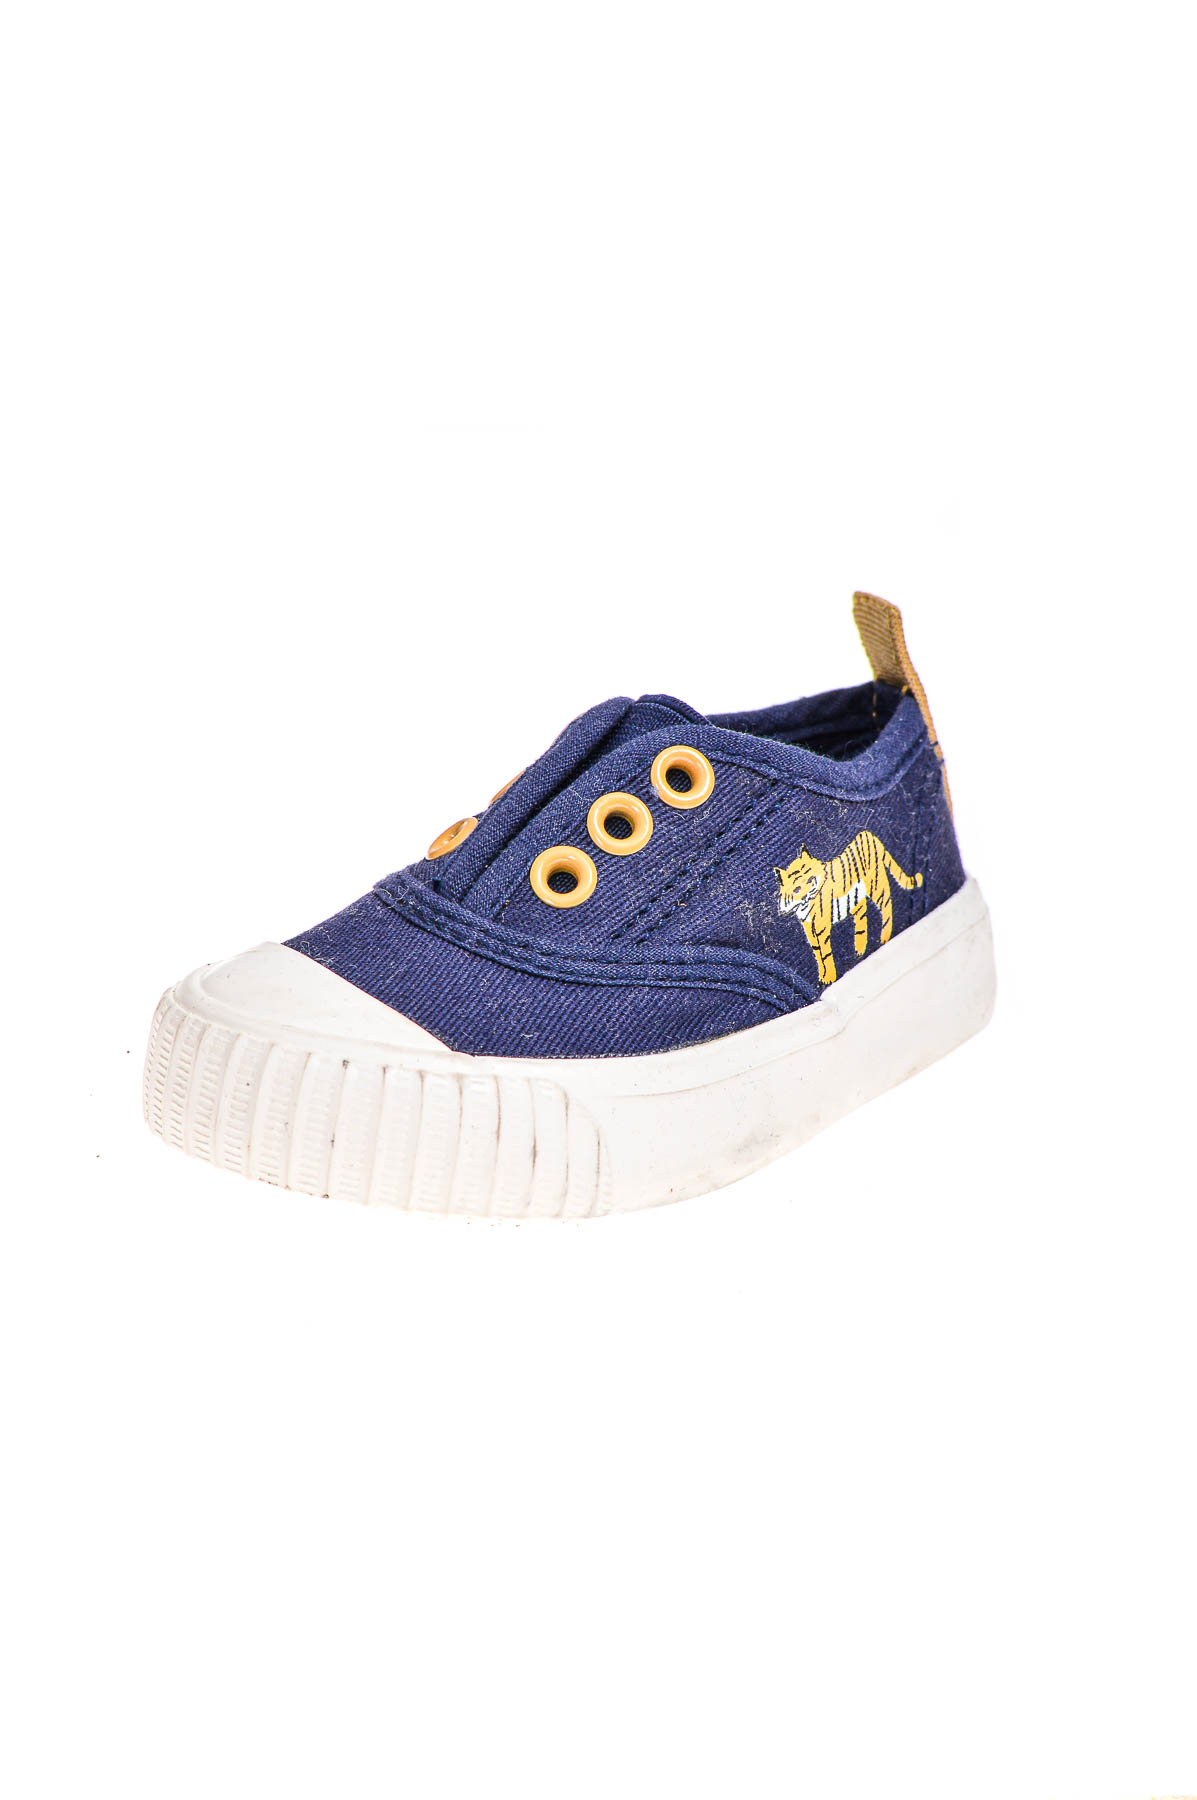 Baby boys' shoes - Target BABY - 1